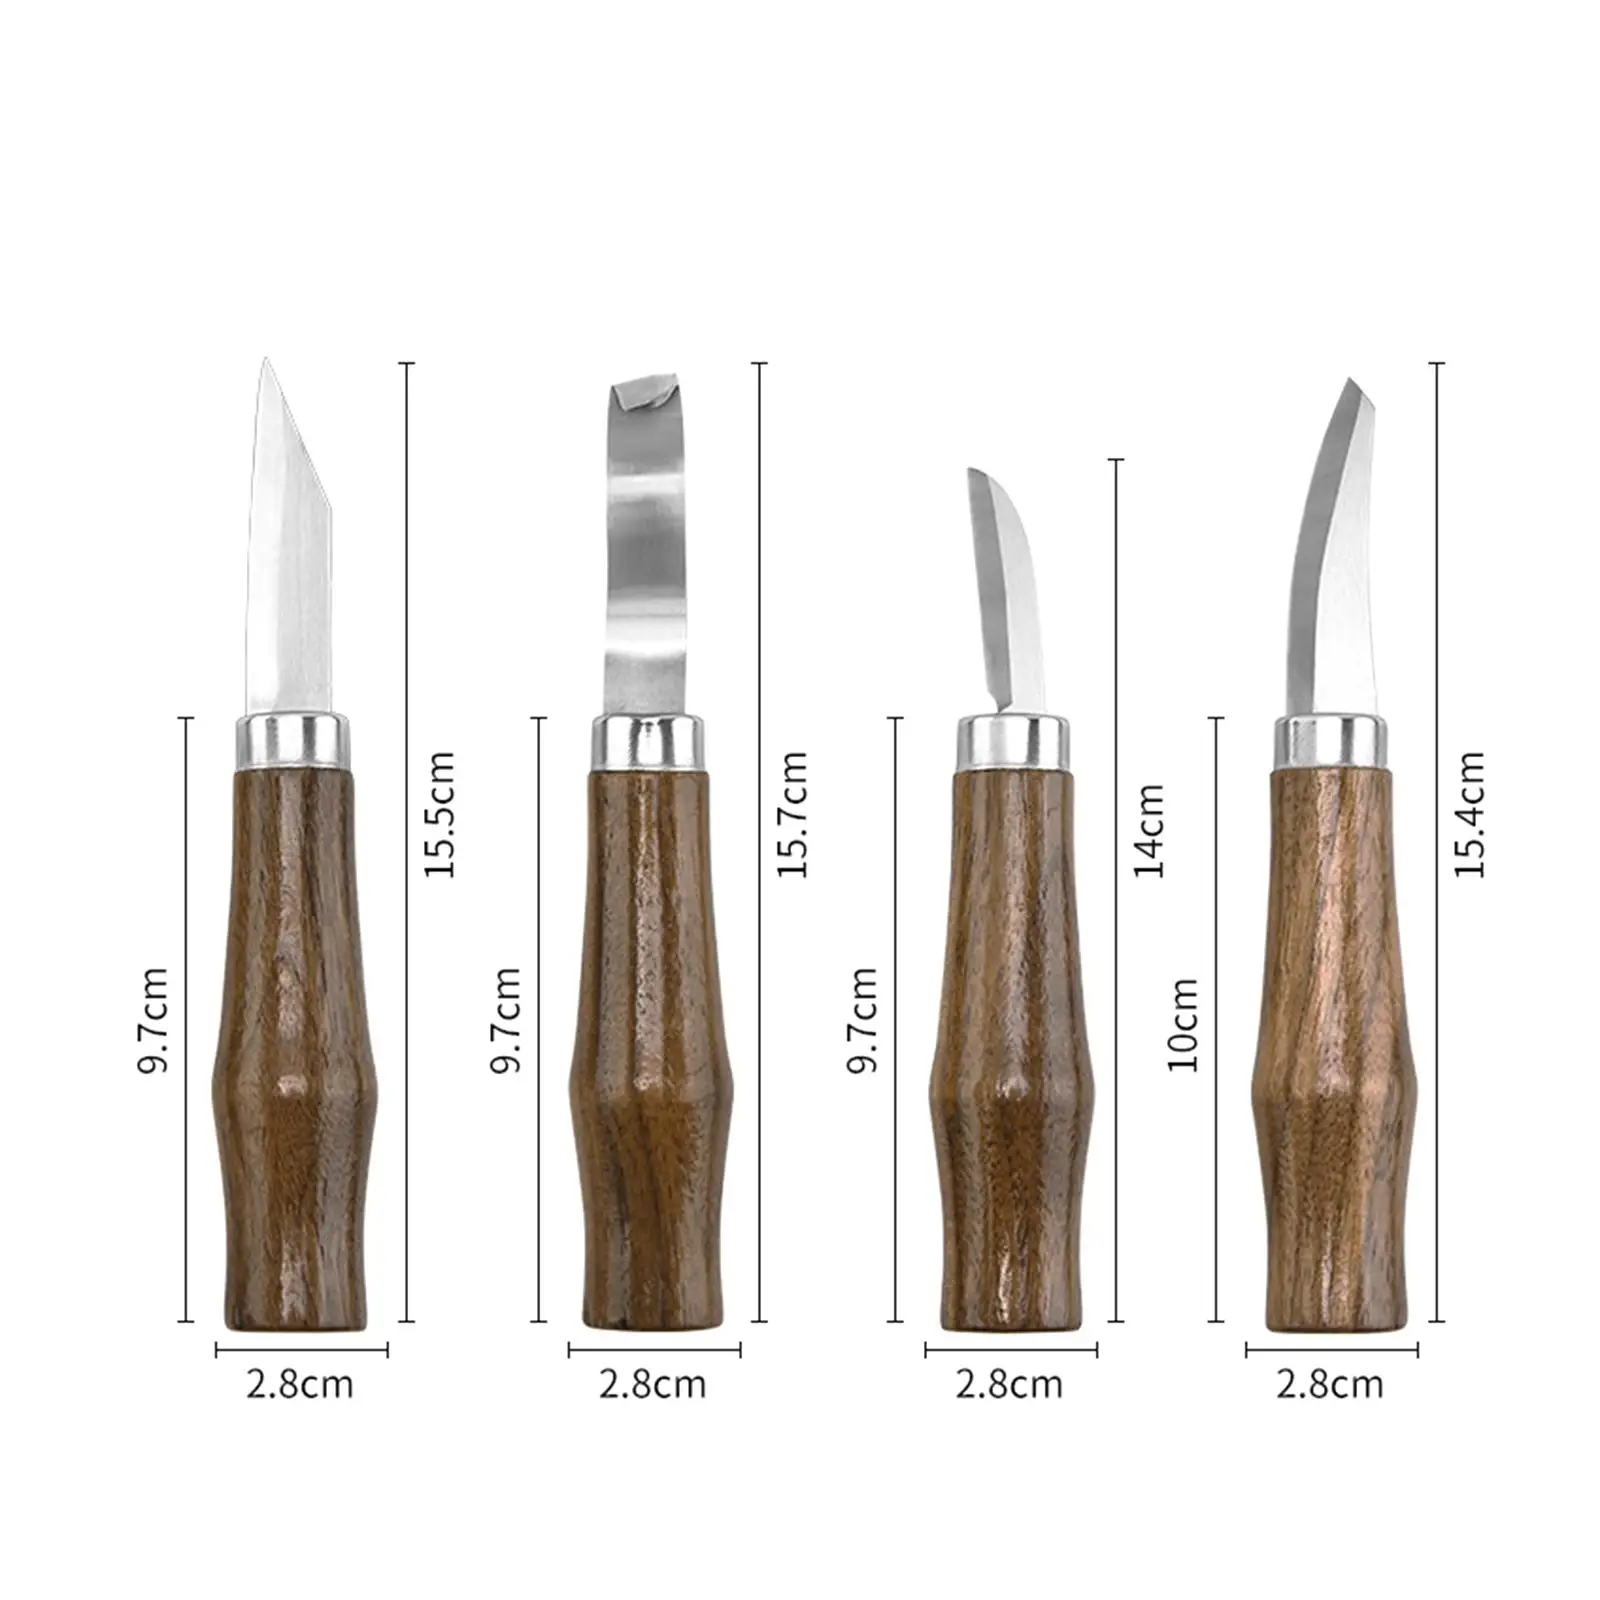 7 Pieces Professional Wood Carving Knife Kit Woodworking Cutter Whittling